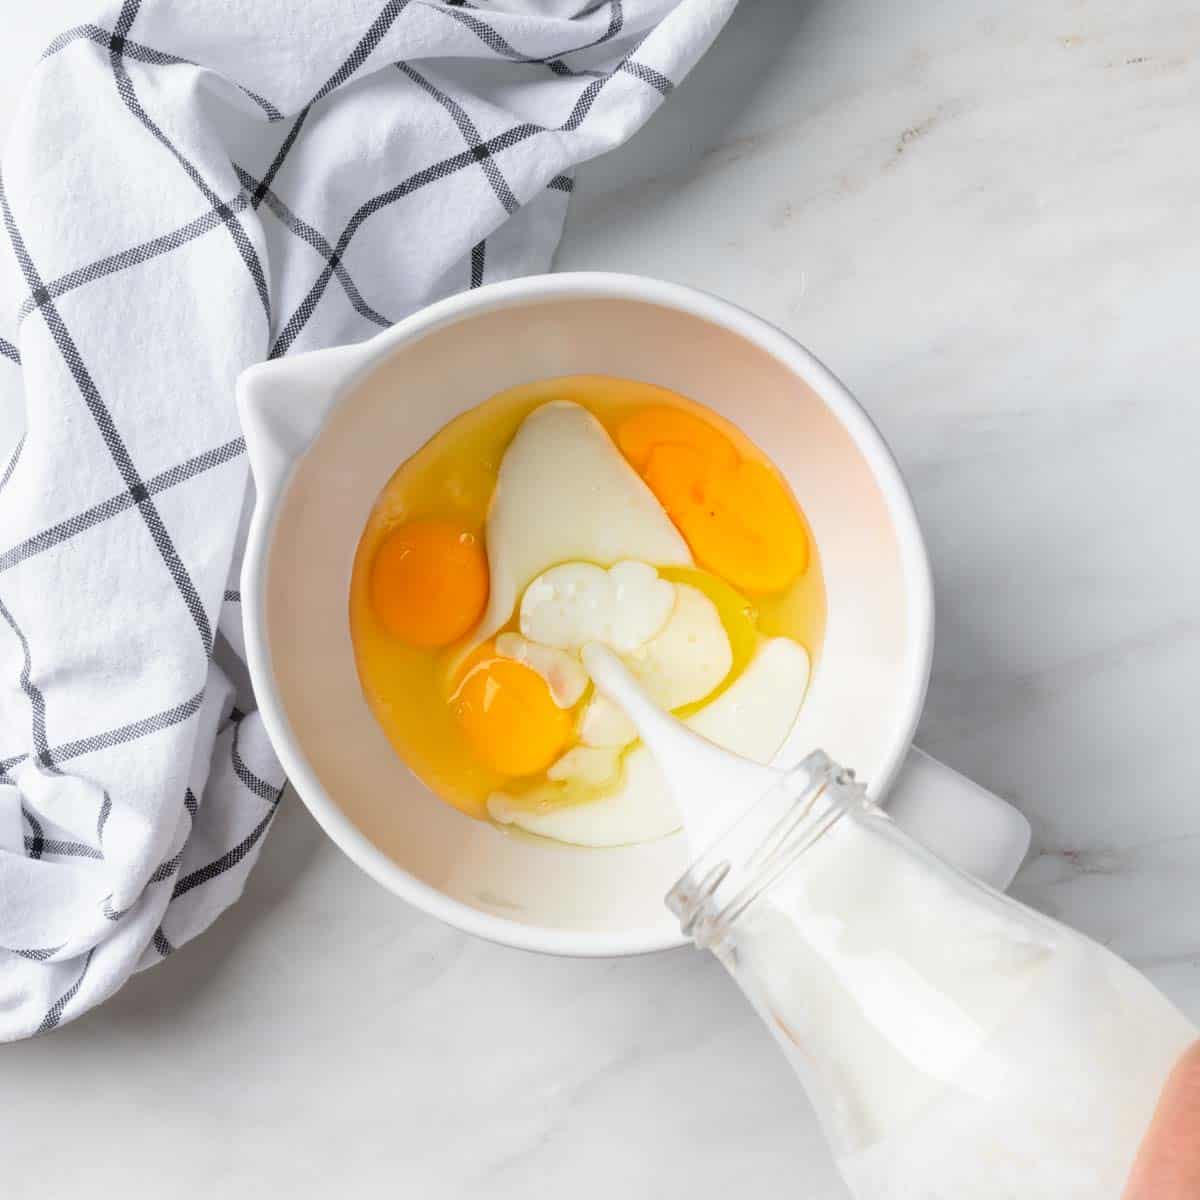 Pouring buttermilk into a bowl of eggs